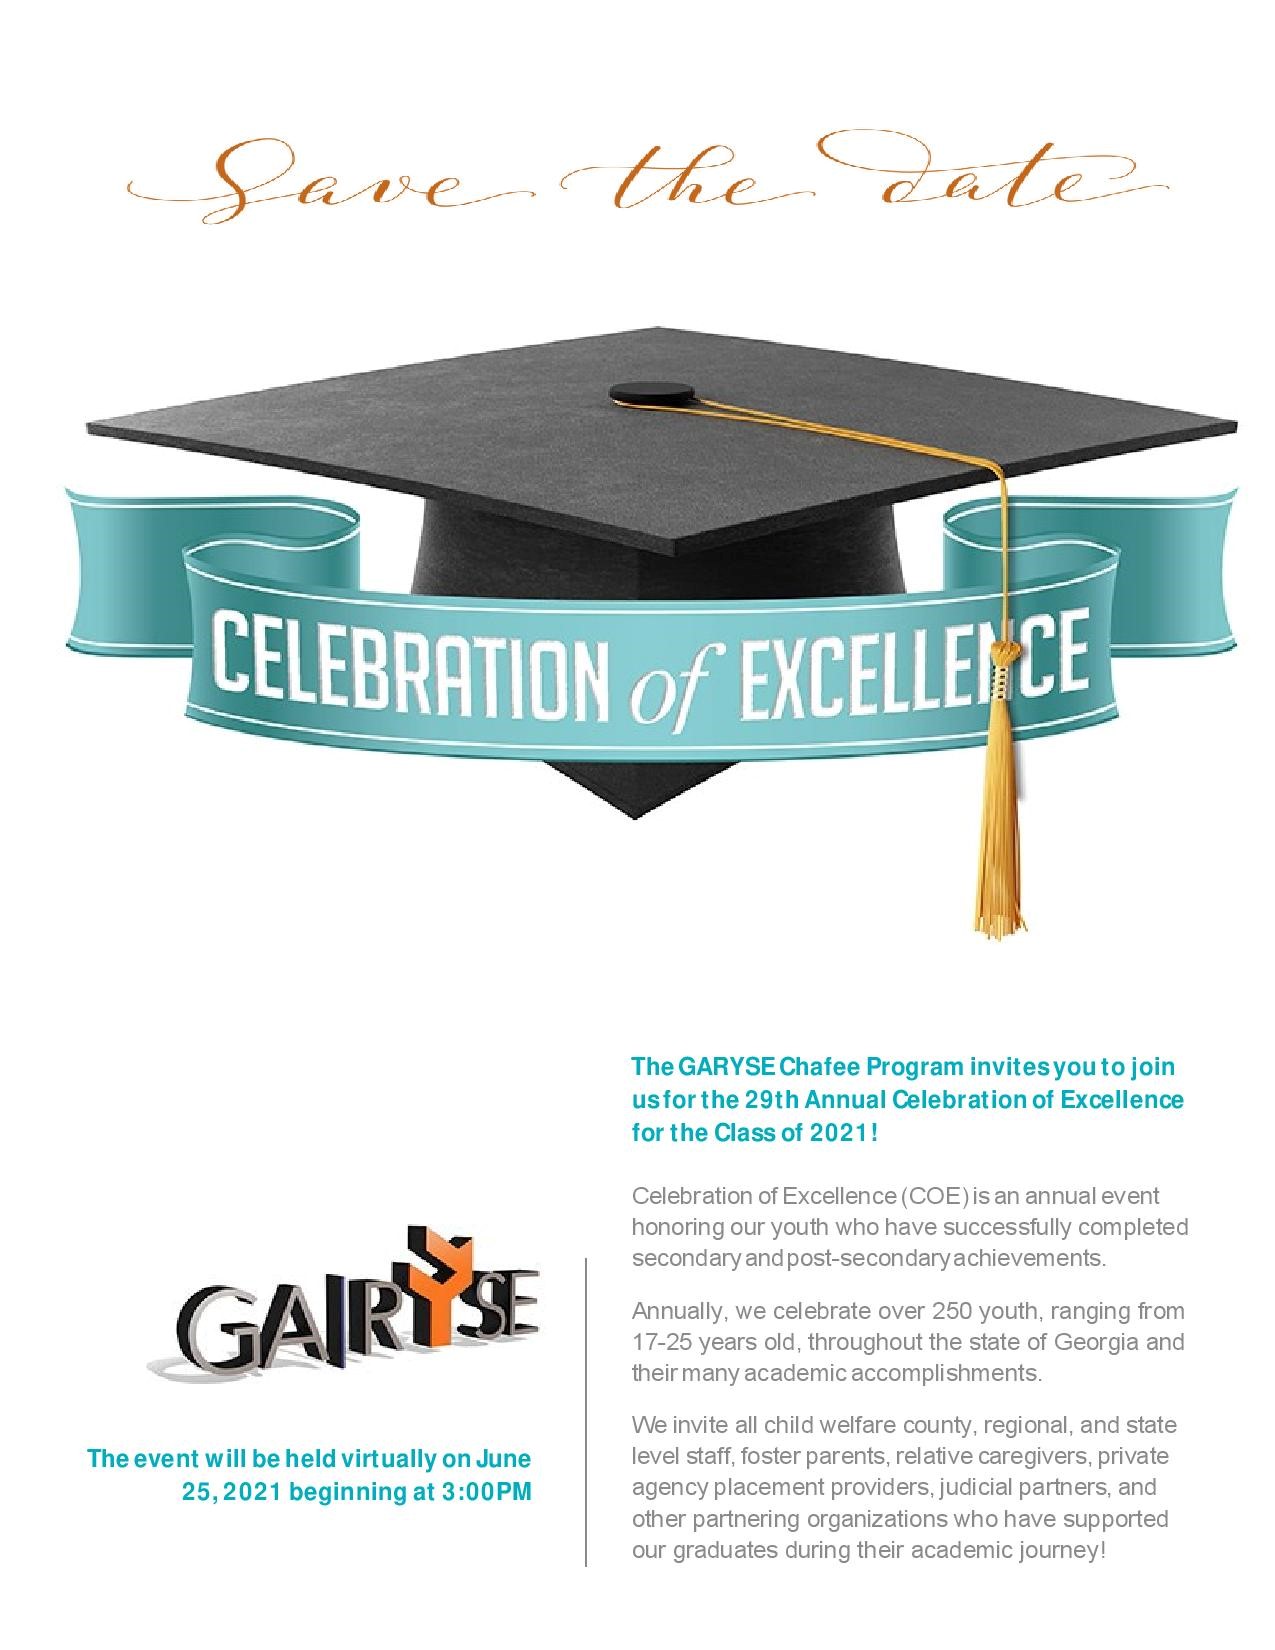 The GARYSE Chafee Program invites all foster parents & private agency placement providers to join us for the 29th Annual Celebration of Excellence for the Class of 2021! The event will be held virtually on June 25, 2021 beginning at 3 PM. 